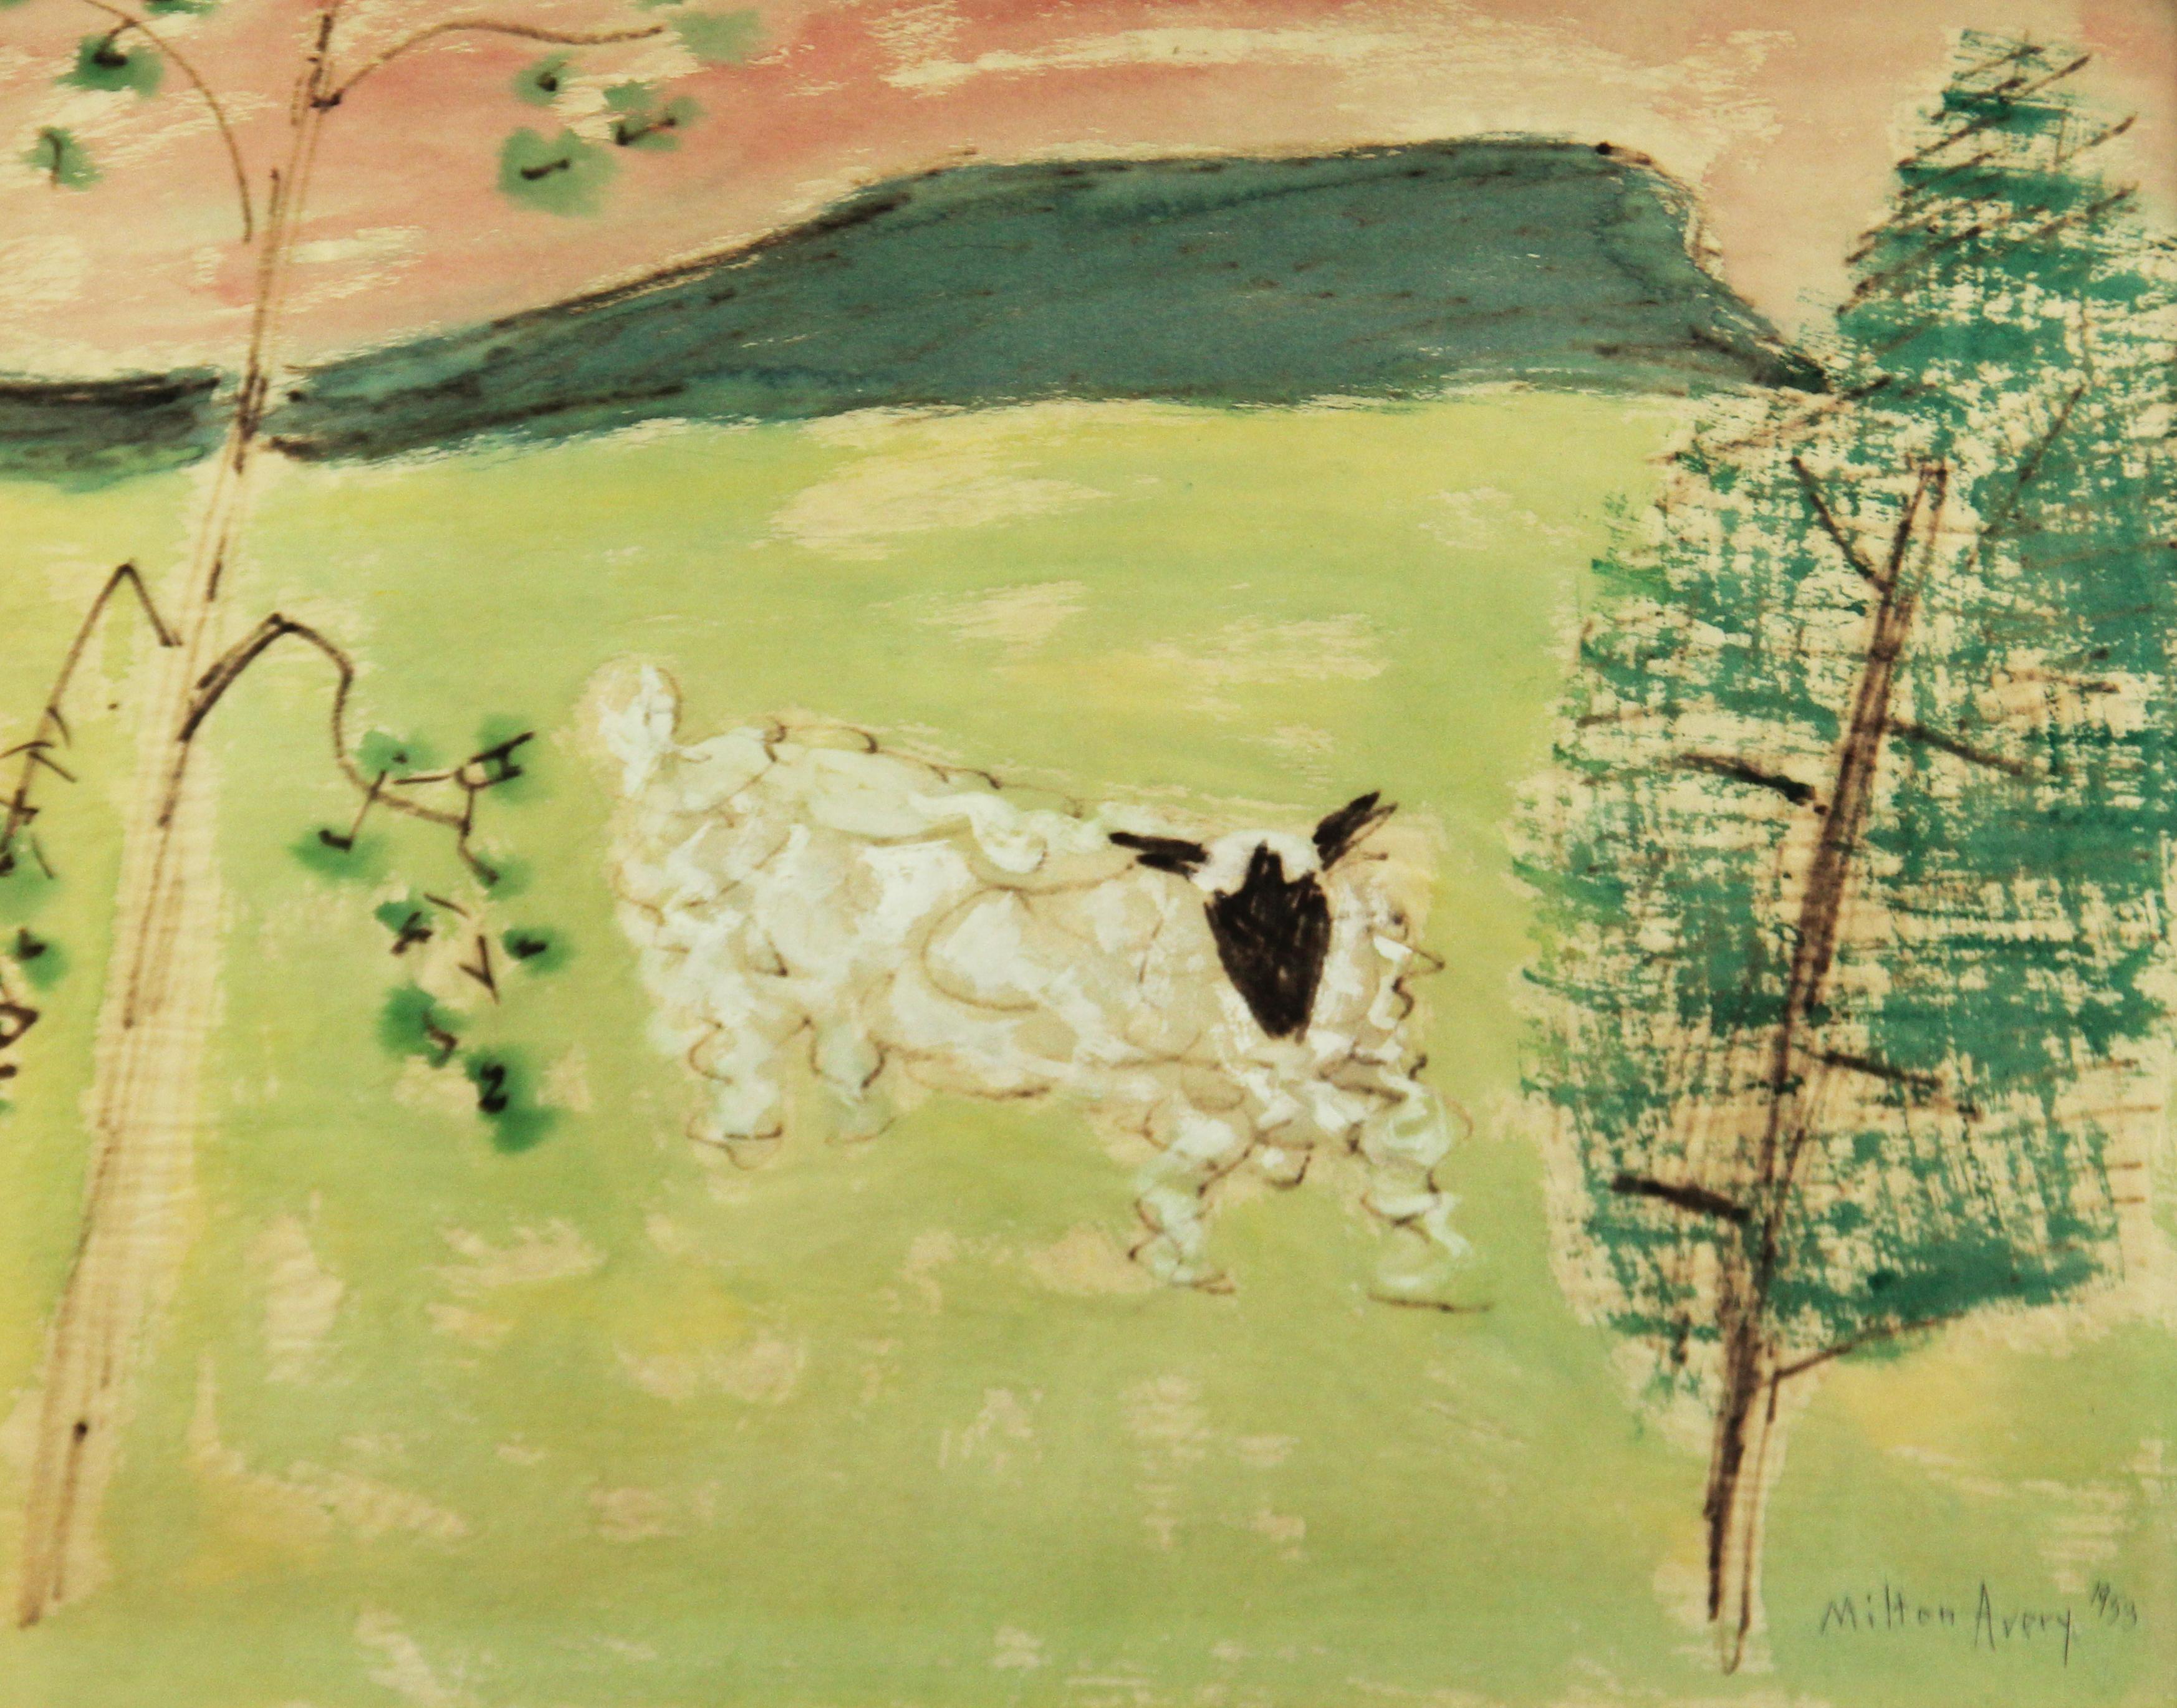 Milton Avery Animal Painting - Sheep Resting, American Modernist, Landscape, Mixed Media on Paper, Signed, 1953